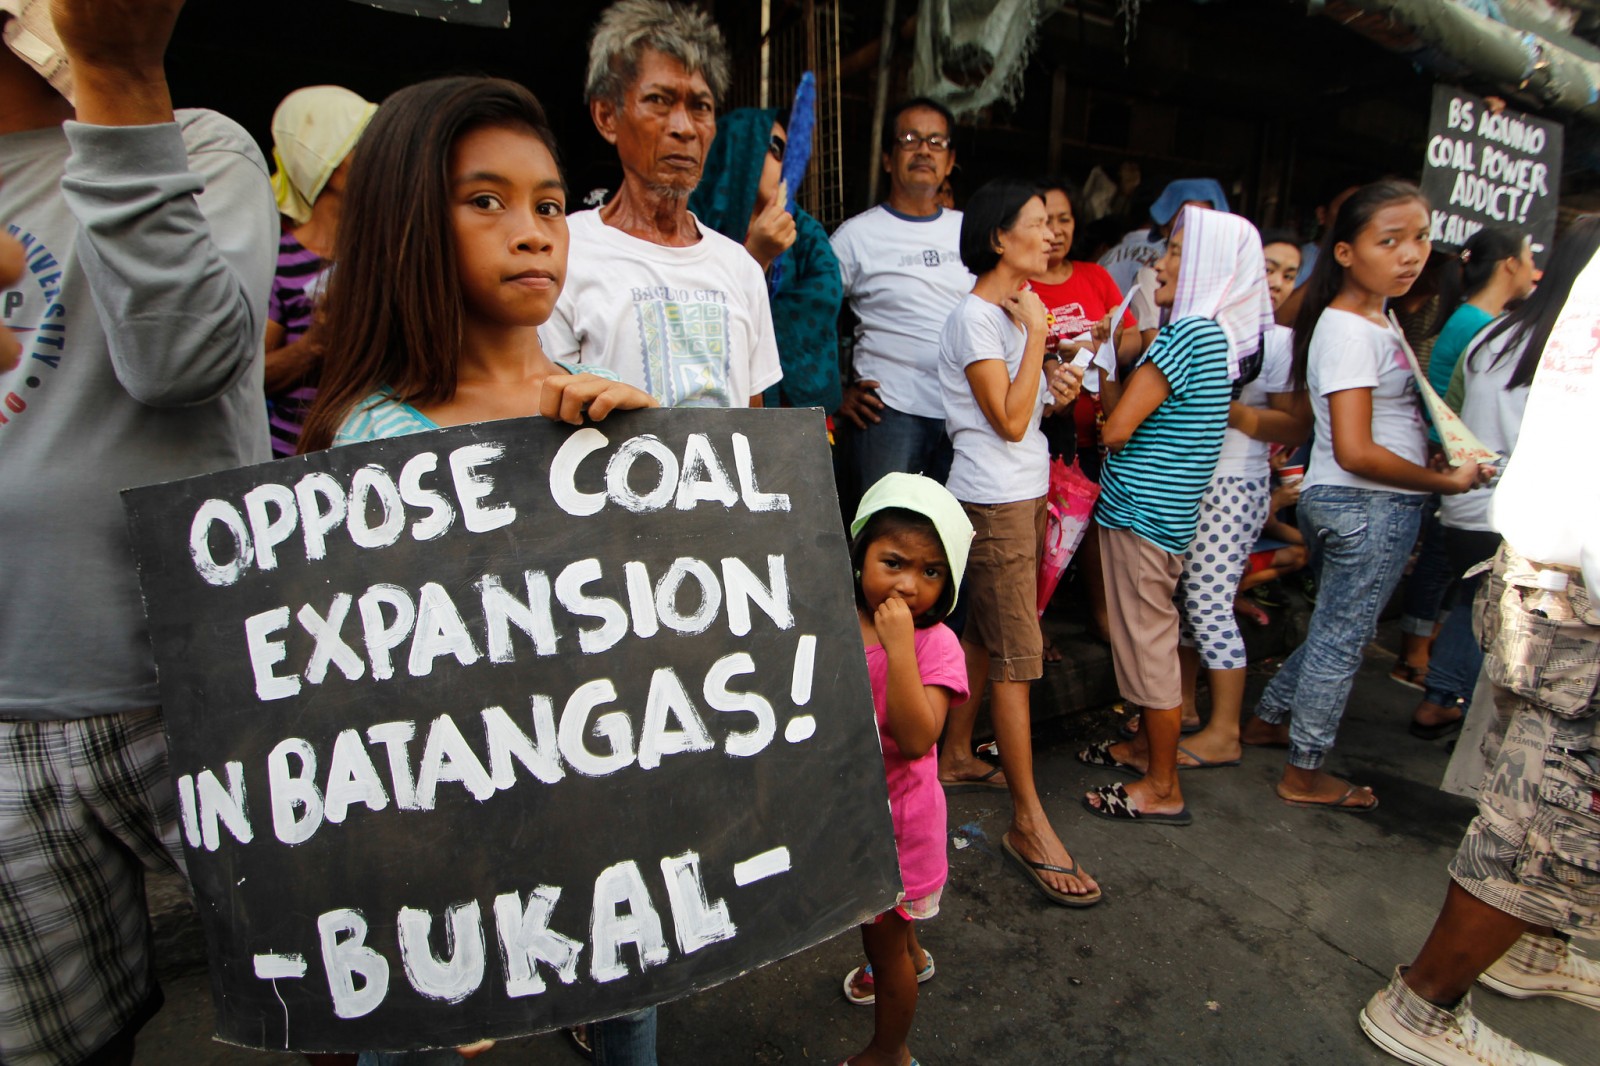 An investigation by Inclusive Development International makes a powerful case that in spite of the public commitment the World Bank made three years ago to stop financing coal projects, it continues to do so surreptitiously and indirectly. Escalating development of coal-fired power plants has stirred public opposition in the Philippines.